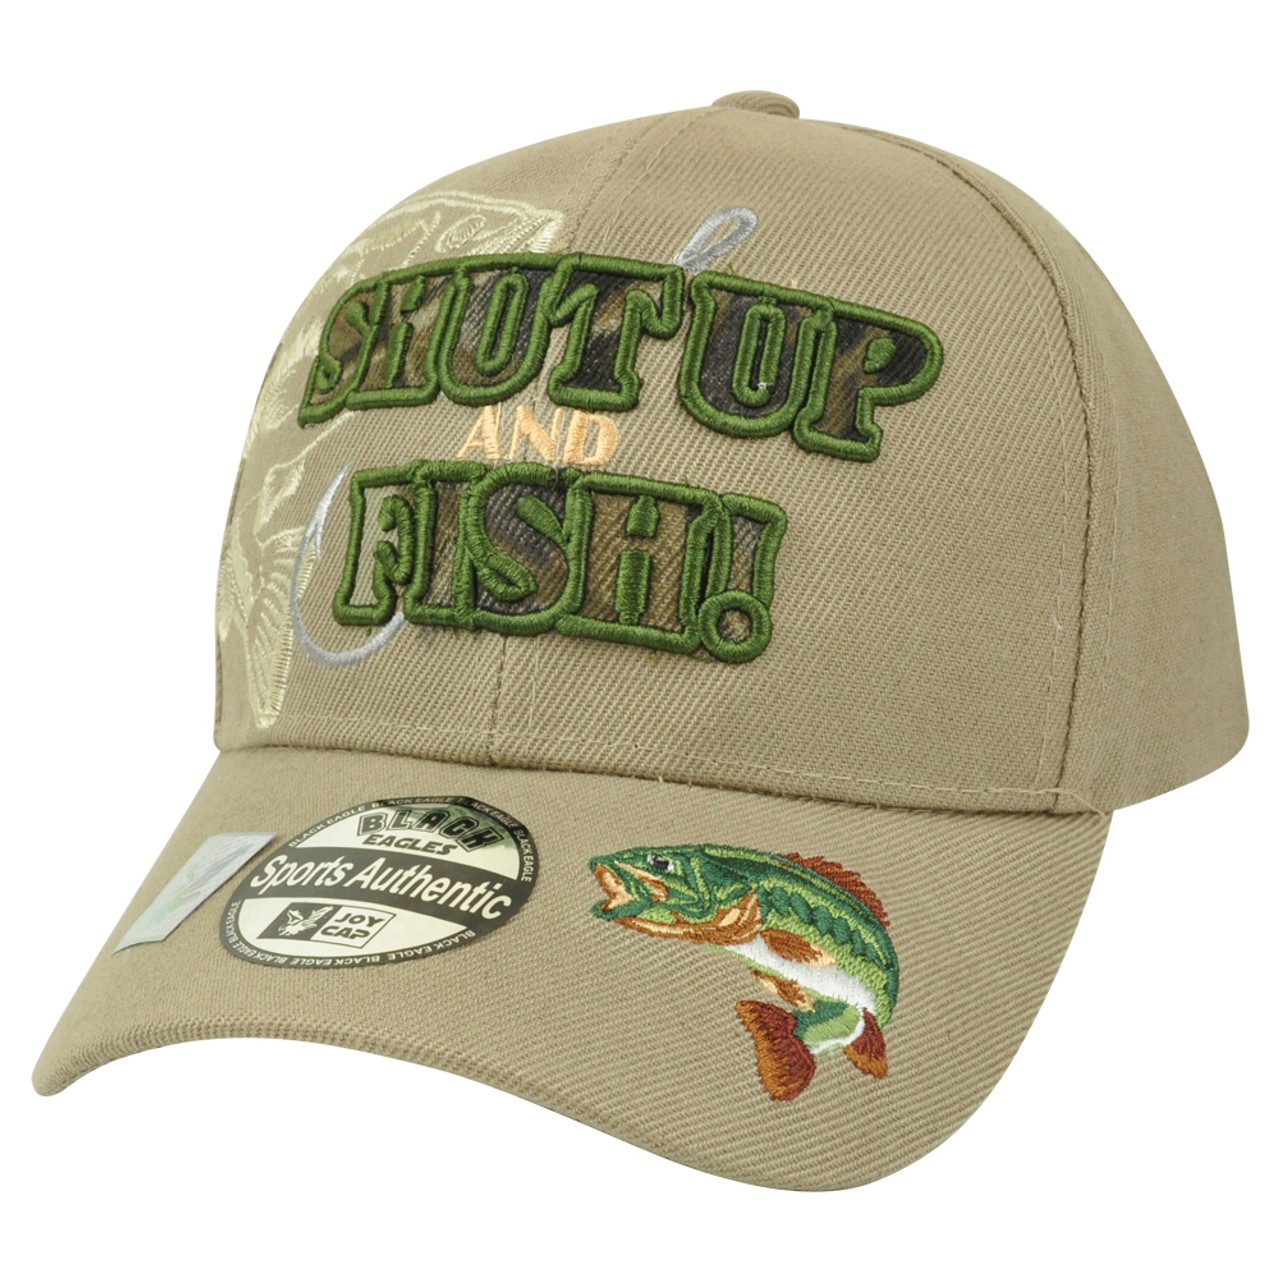 Shut Up and Fish Fishing Bass Hook Outdoors Beige Velcro Camping